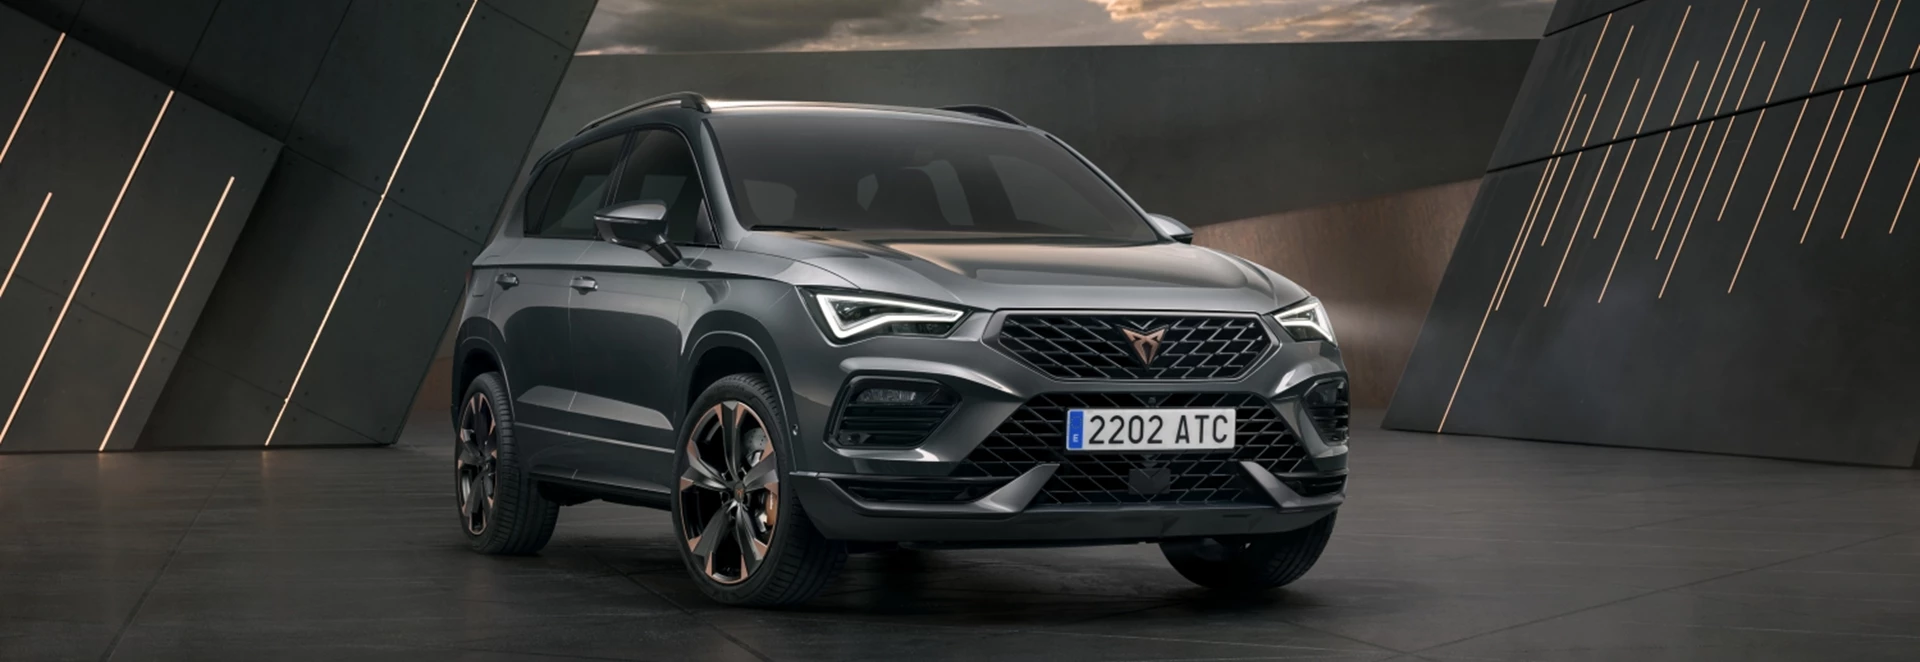 Cupra Ateca: What you need to know about this sporty SUV 